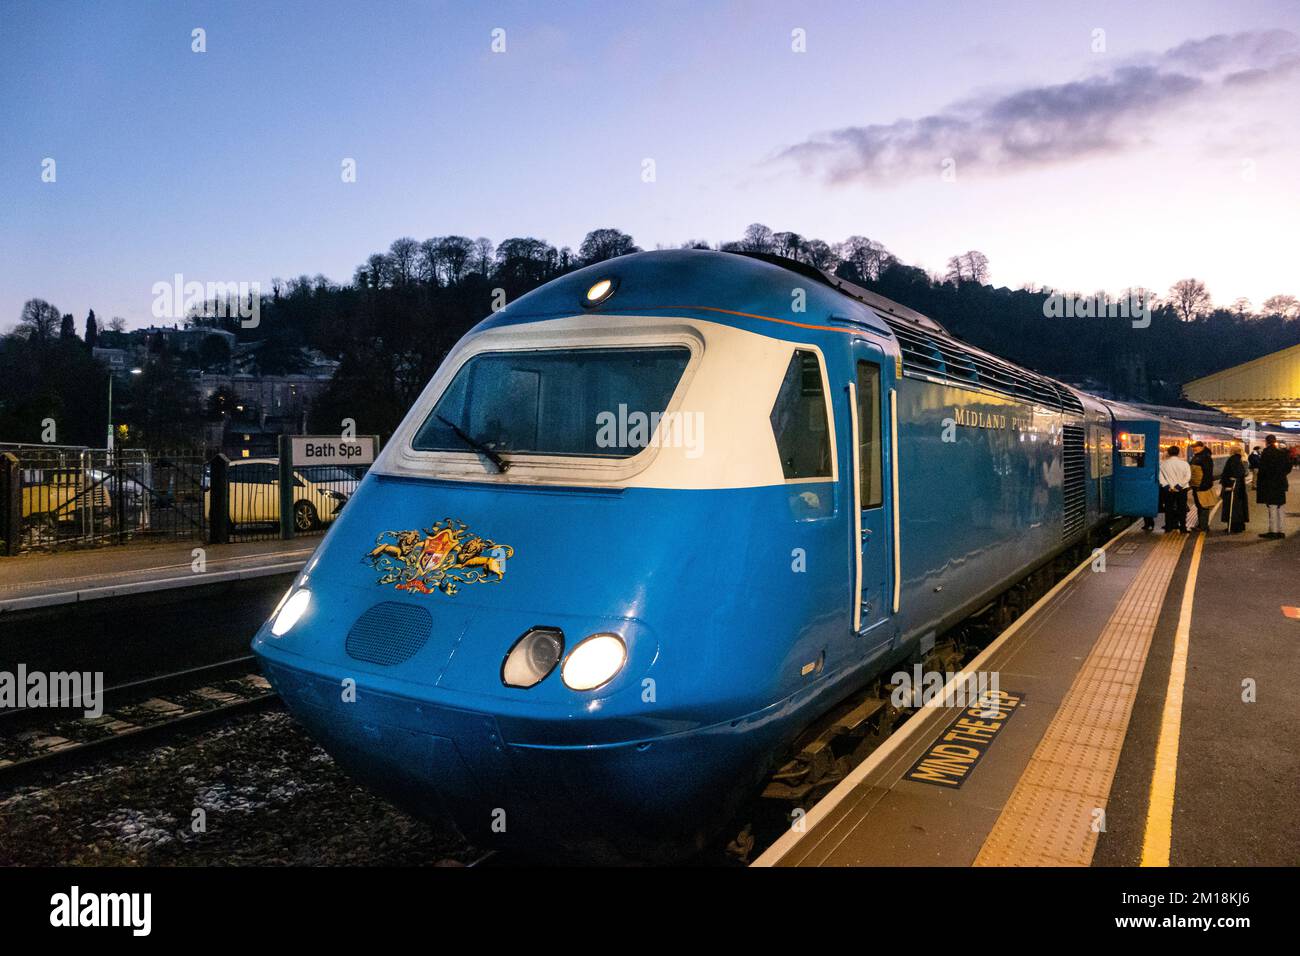 The Midland Pullman deluxe train in Bath station Stock Photo